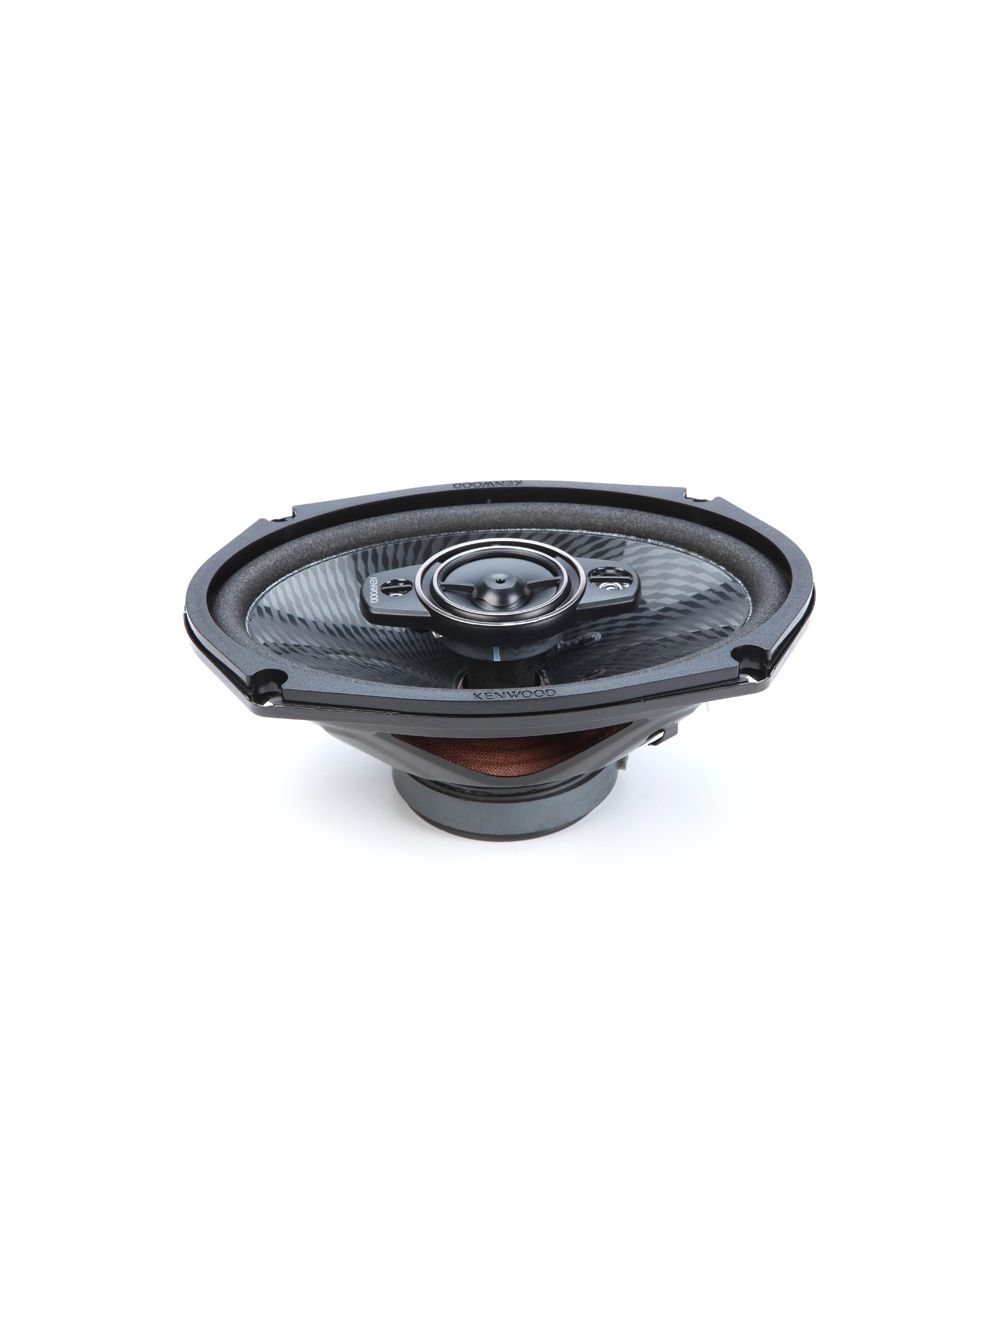 Car Speaker Size Replacement fits 2007-2010 for Chrysler Sebring (not amplified)